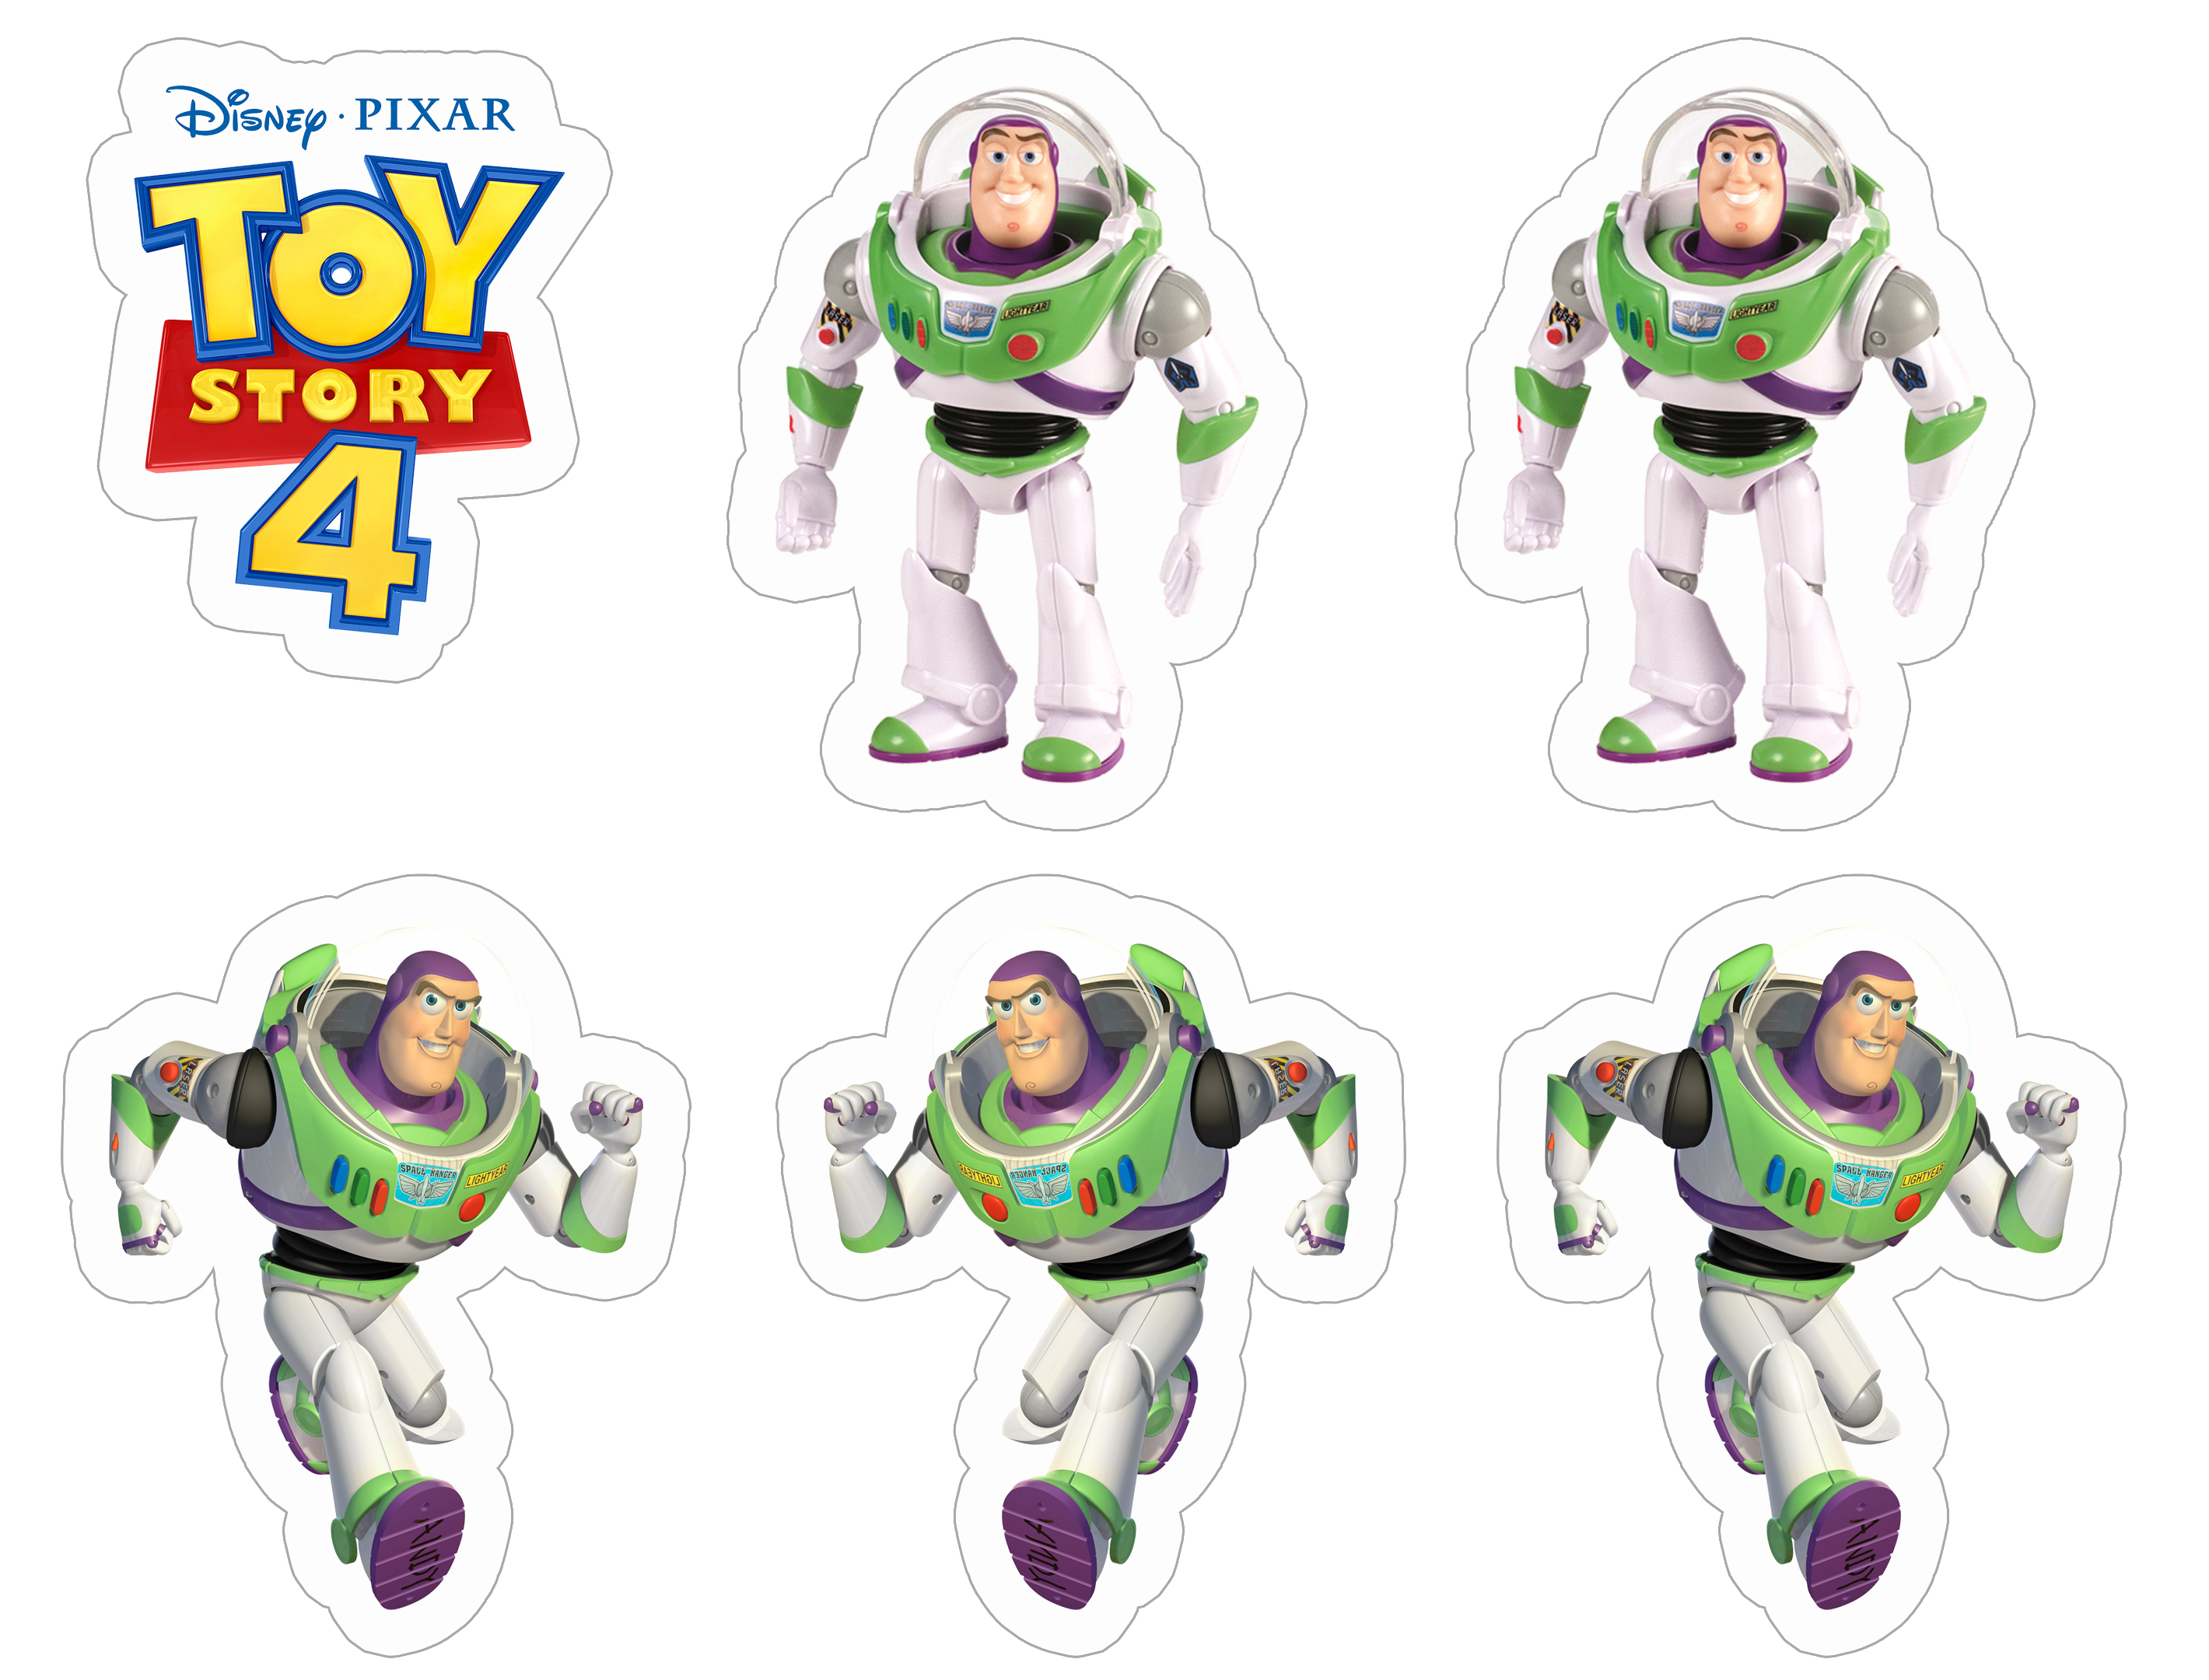 Buzz Lightyear Toy Story 4 free and printable sticker template. Wallpaper